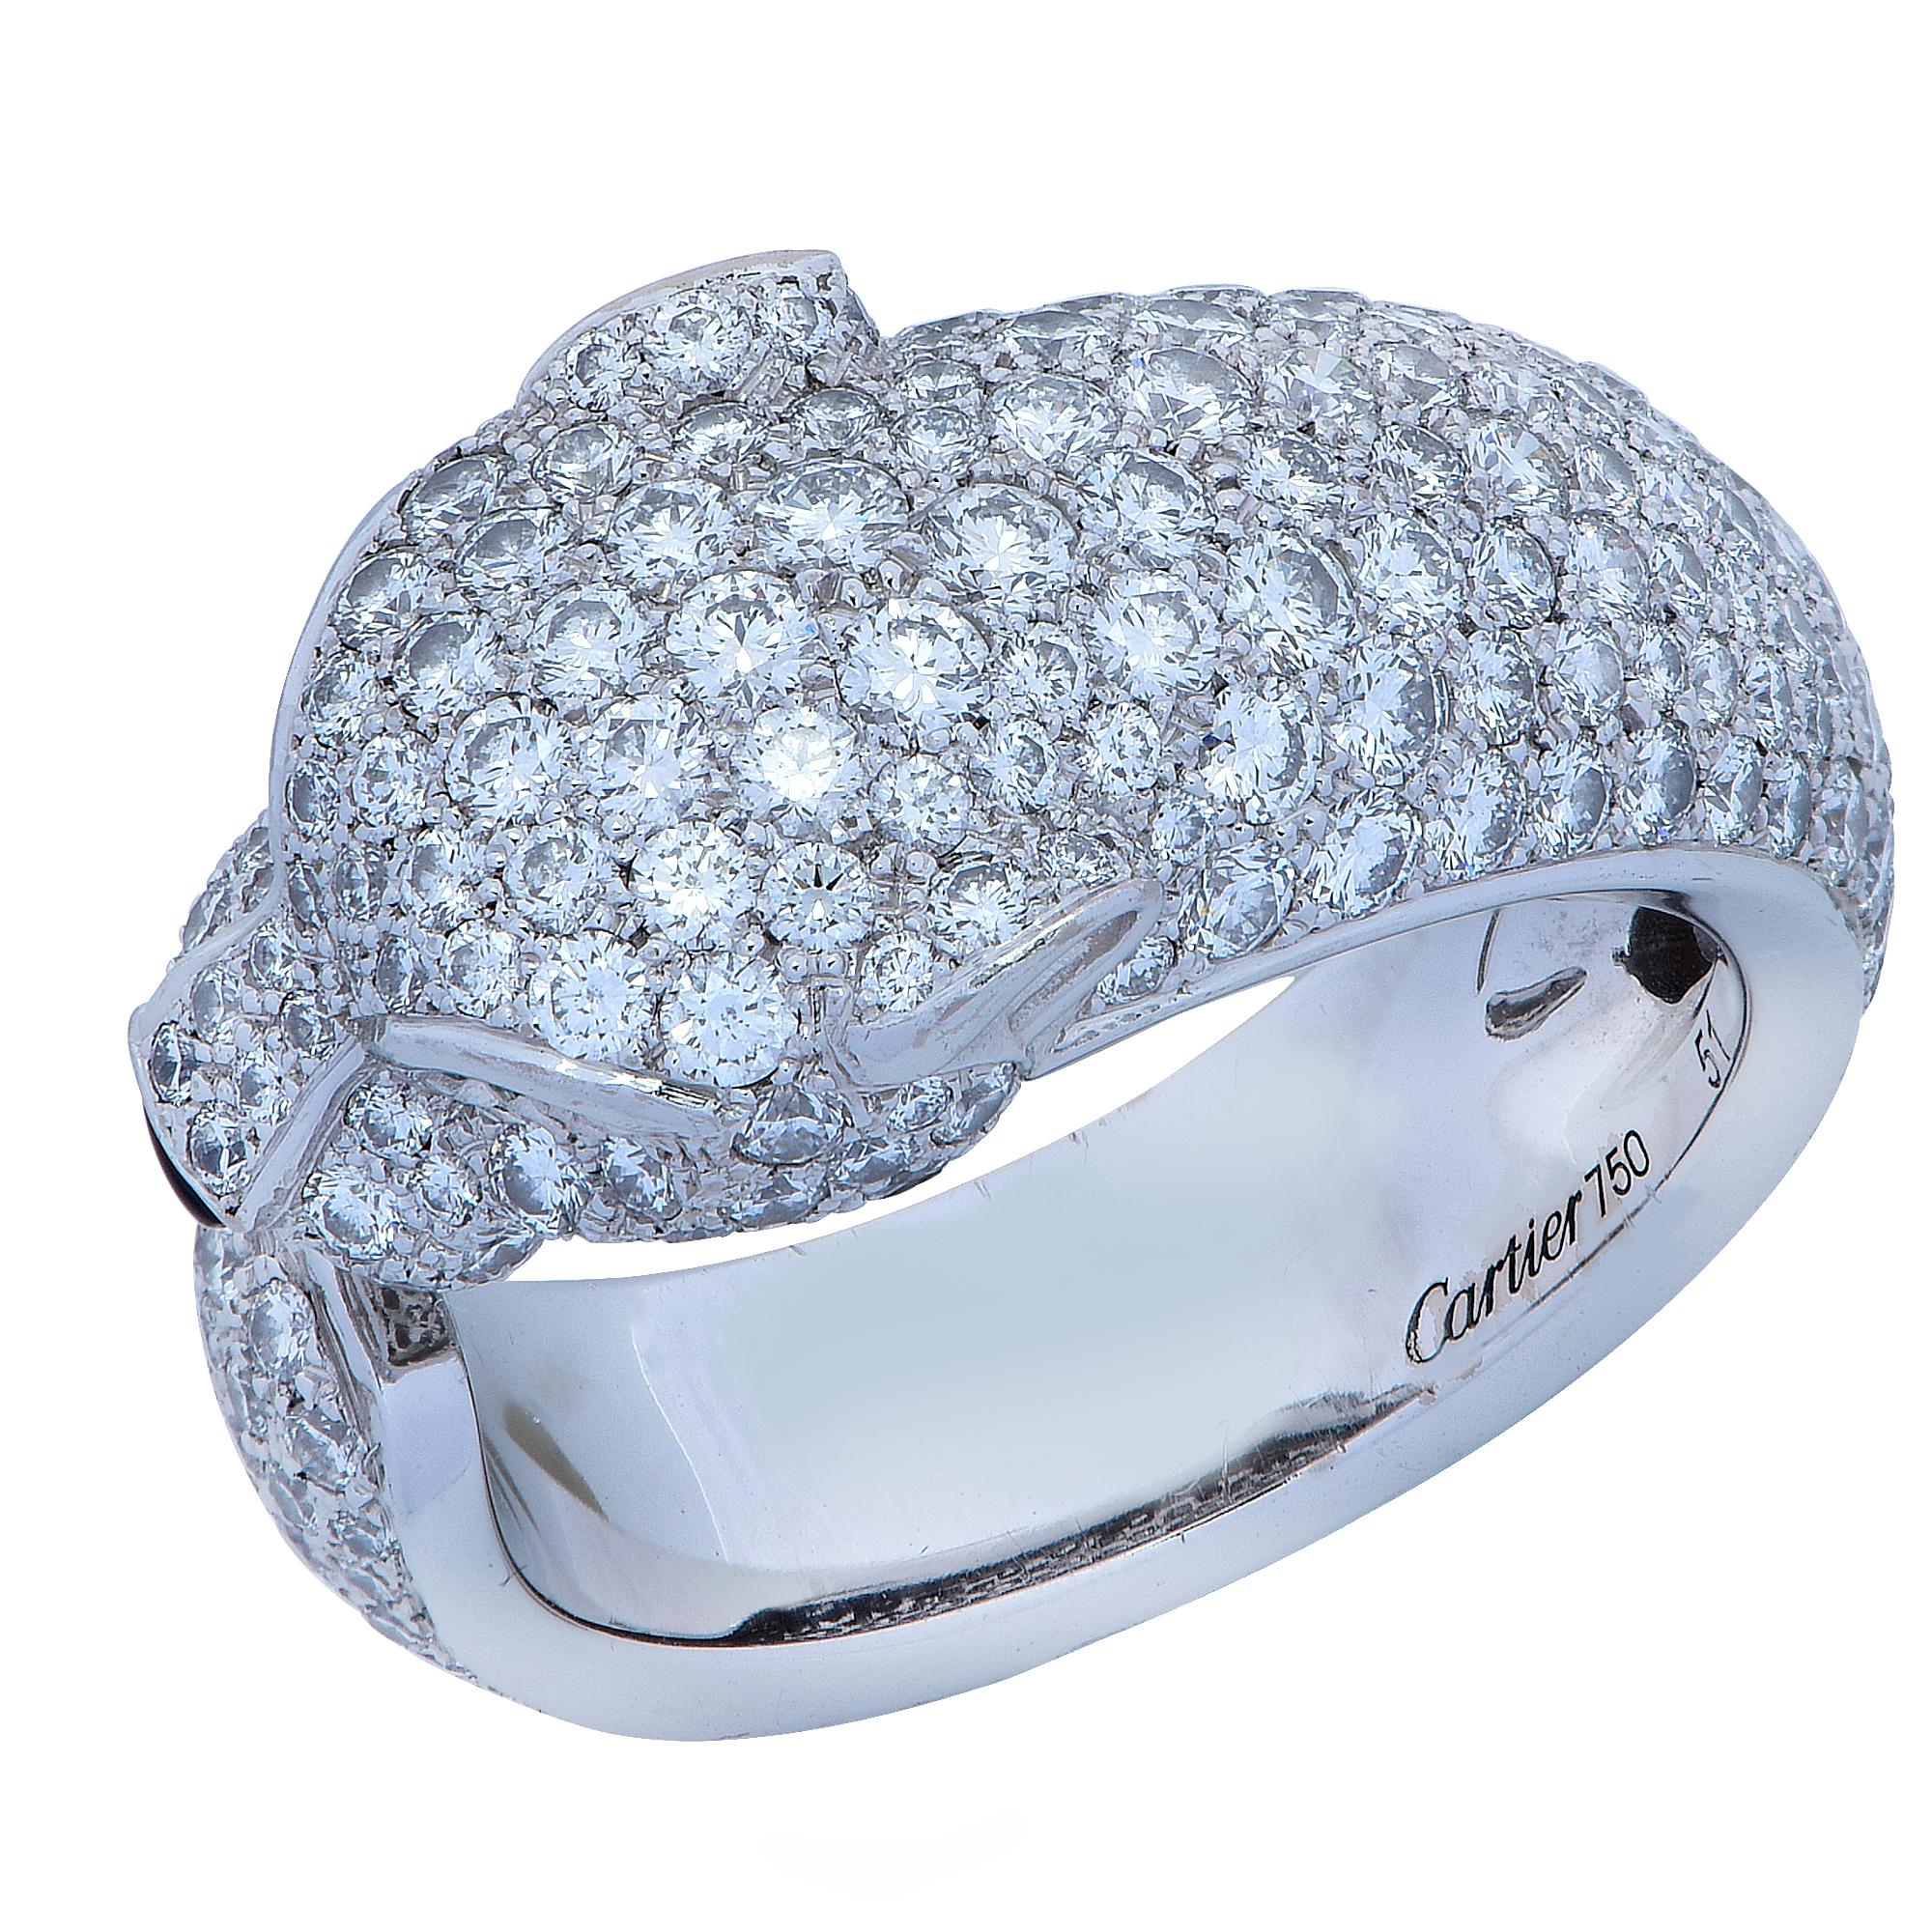 Stunning Panthere de Cartier diamond ring, crafted in 18 karat white gold, encrusted with 285 diamonds weighing 2.39 carats total weight, with emerald eyes and an onyx nose. The ring, which features Cartier’s iconic panther, is a European size 51,